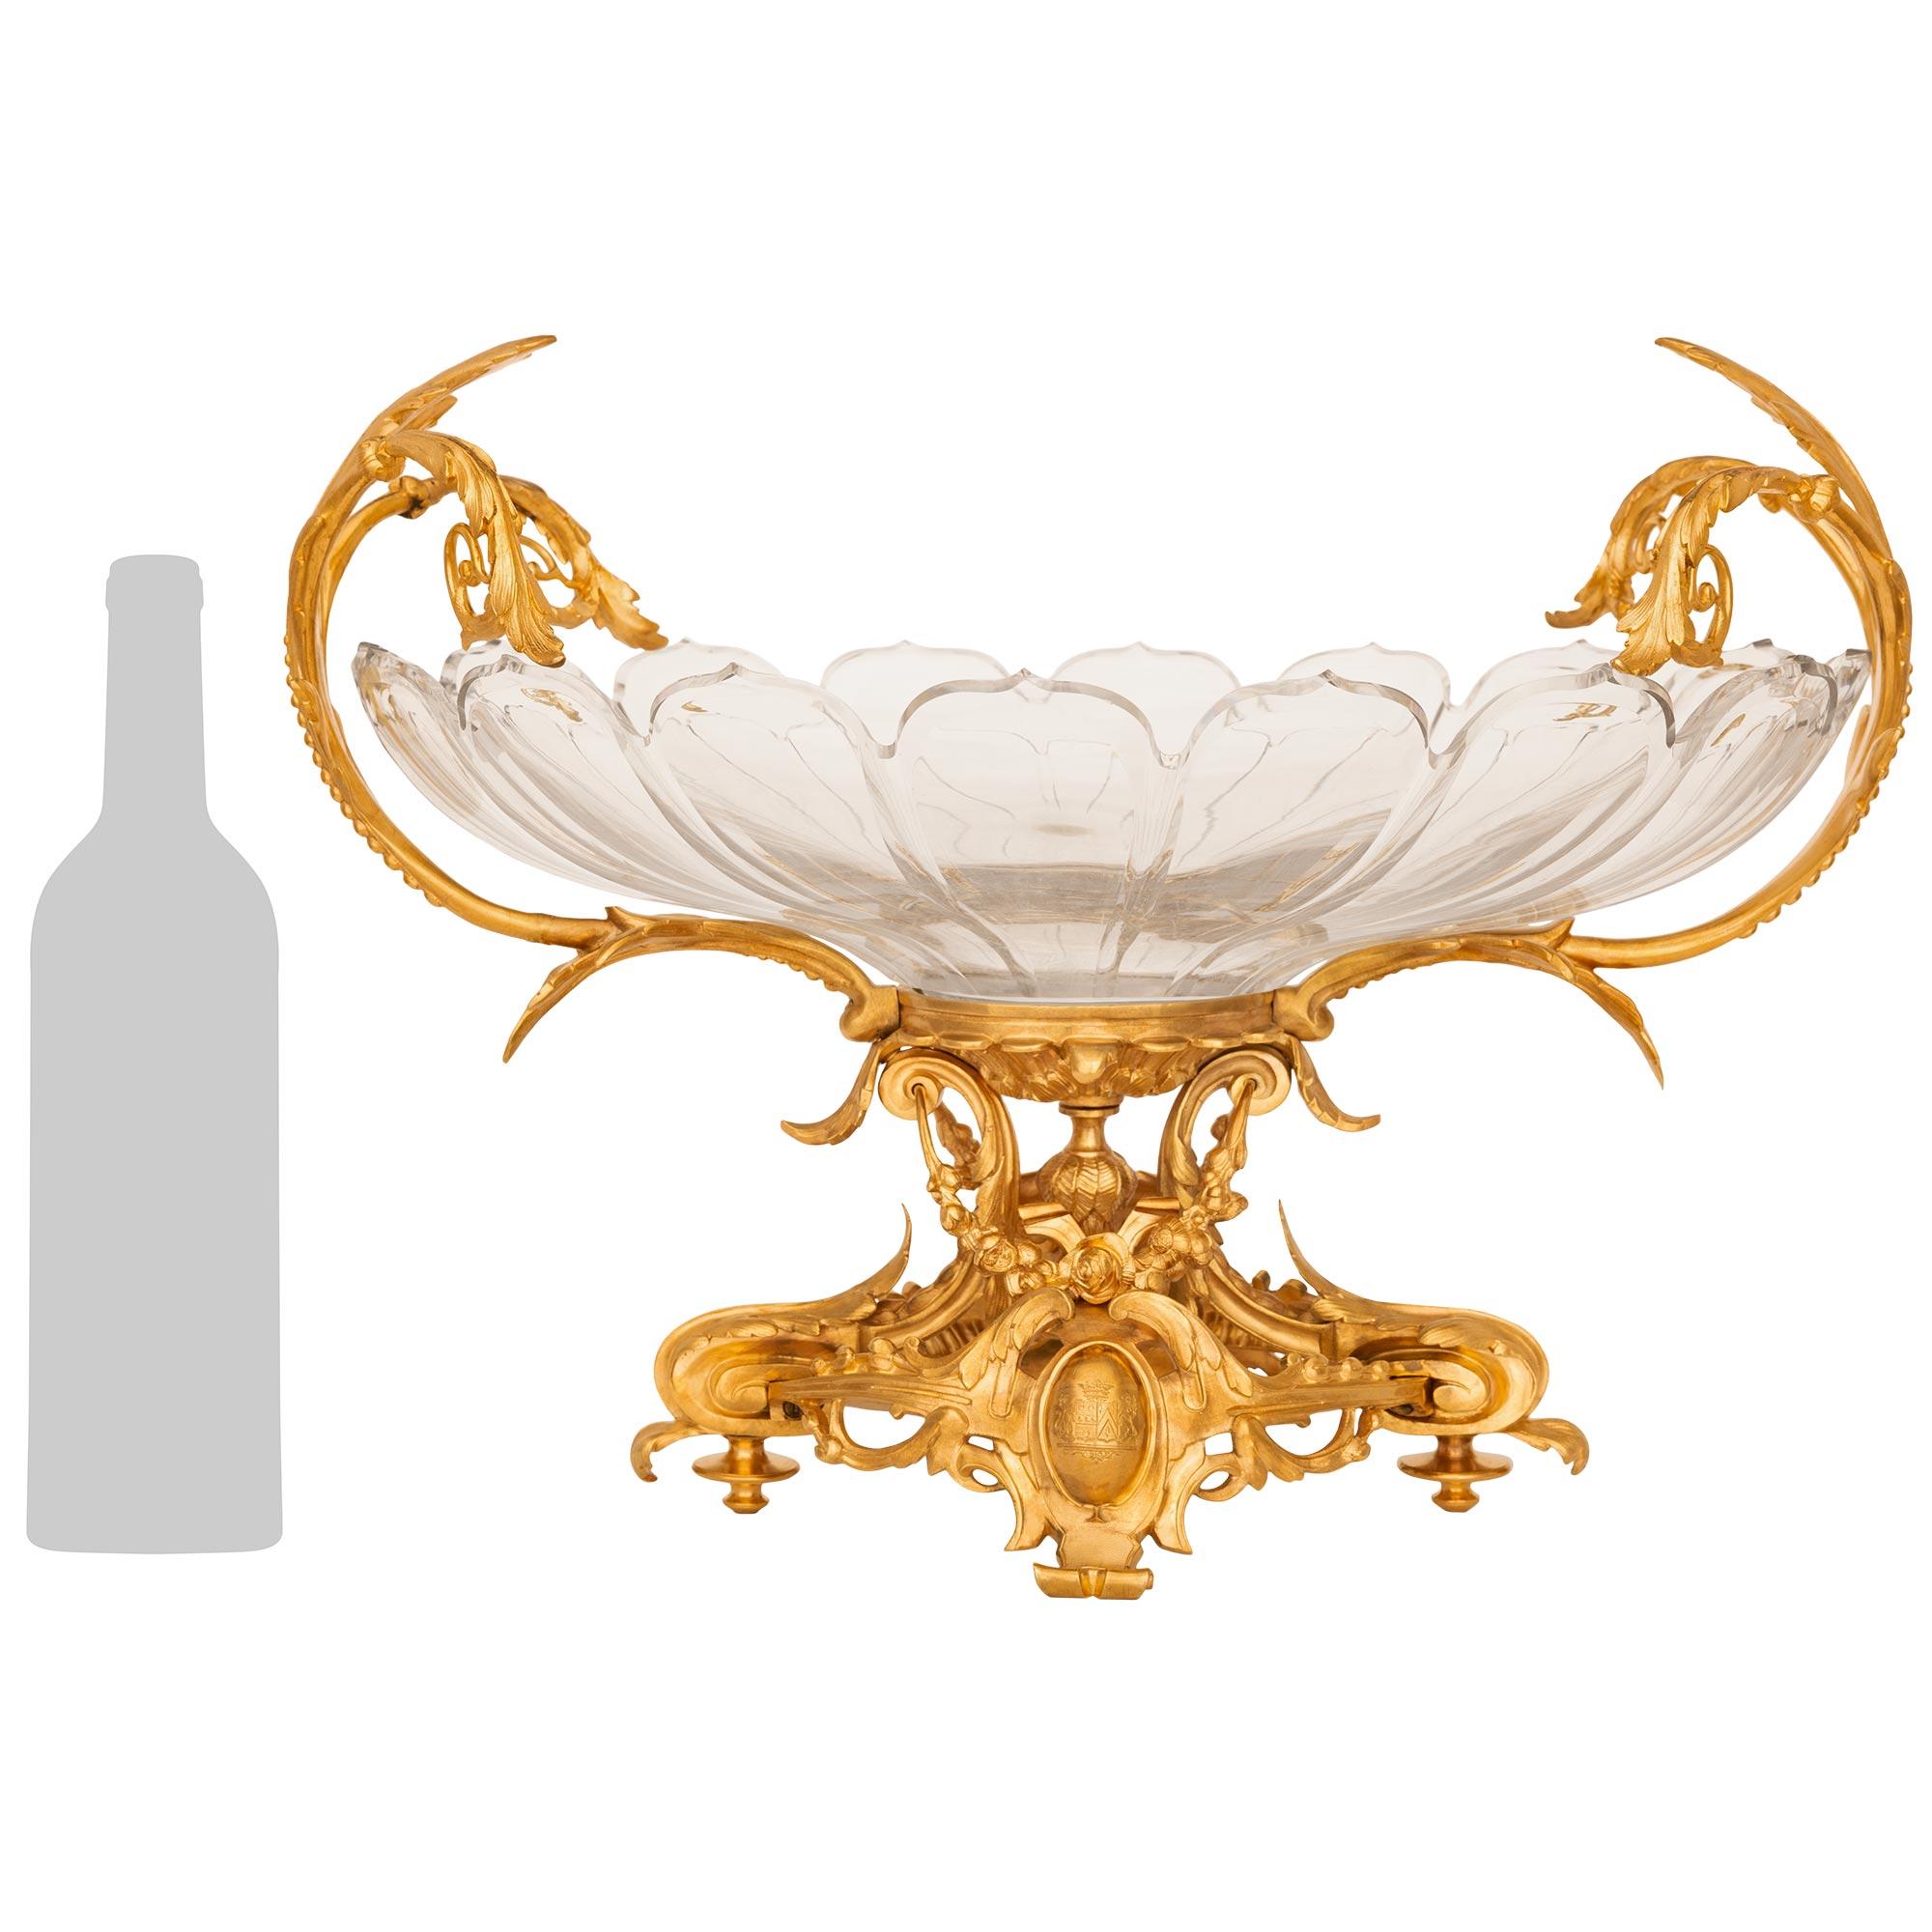 A stunning and high quality French 19th century Louis XV st. Baccarat Crystal and Ormolu centerpiece. This wonderful oval centerpiece is raised on a pierced Ormolu base decorated elegantly with scrolling foliate movements, swaging floral garlands